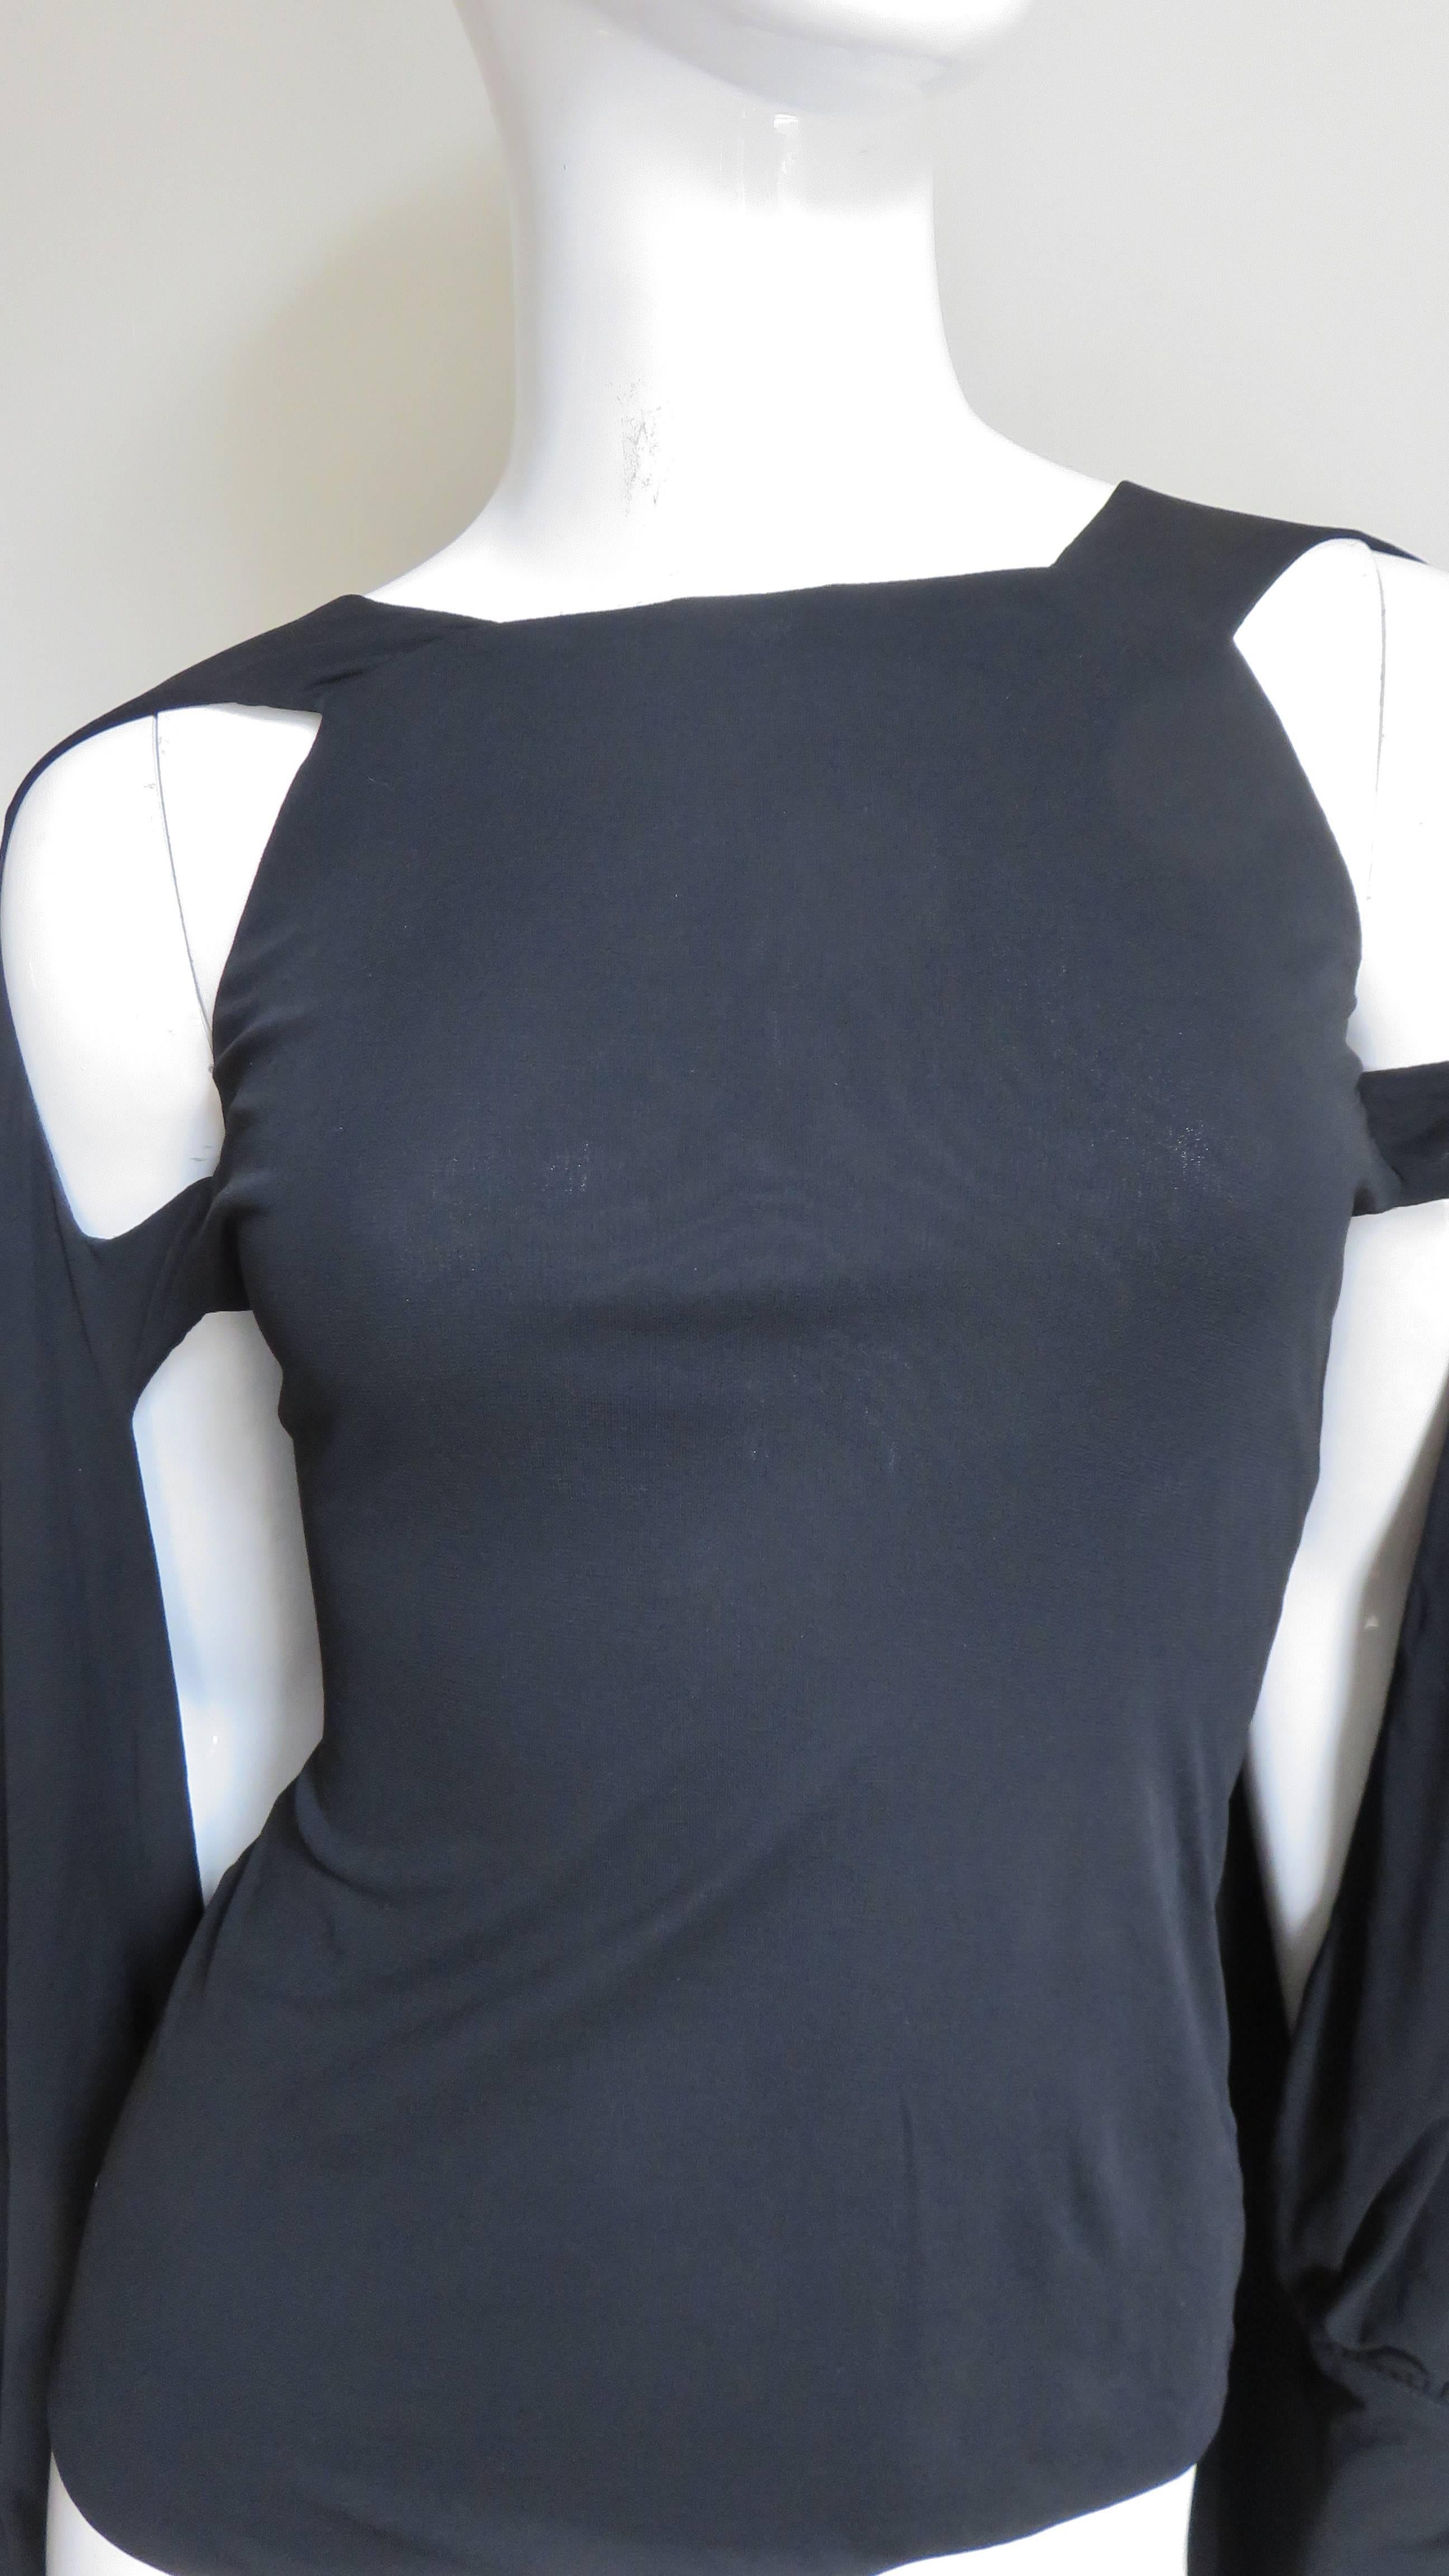 A fabulous black silk jersey top from Antonio Berardi.  It is a basic t-shirt with straps at and below the shoulders on the arms.  The straps drape into full back cape with 5 button cuffed sleeves revealing the front of the arms.  
Appears unworn